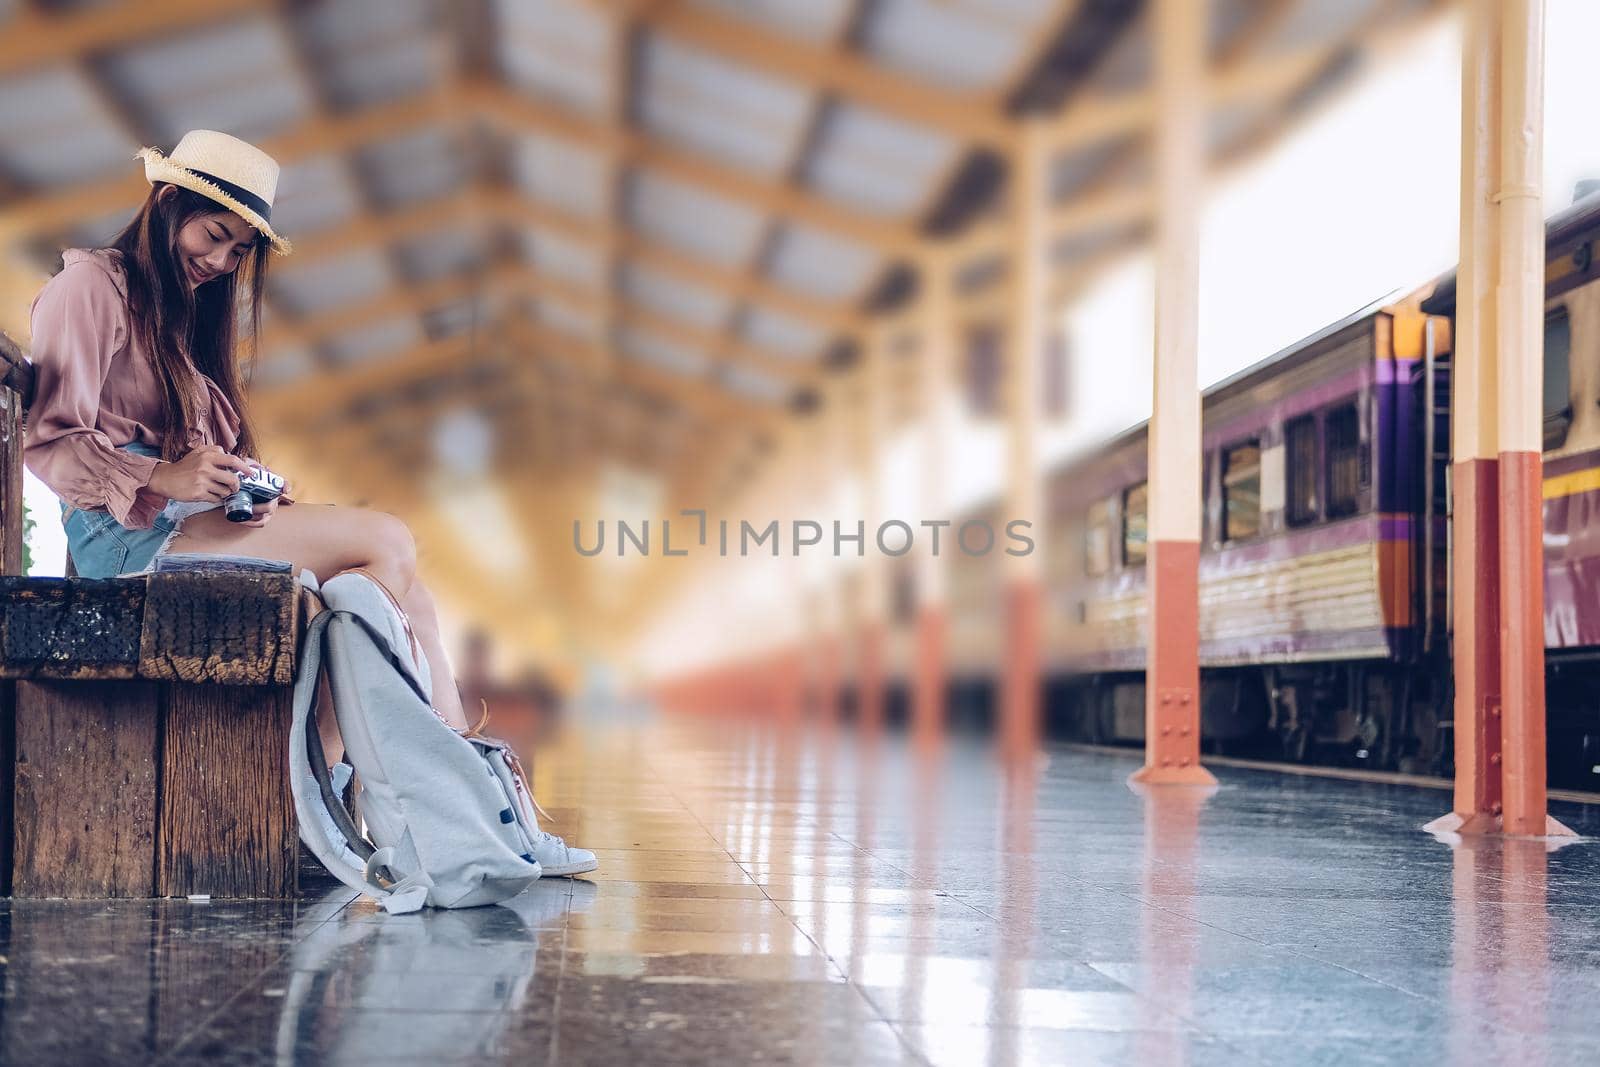 woman traveler holding camera taking photo at train station. travel trip journey concept